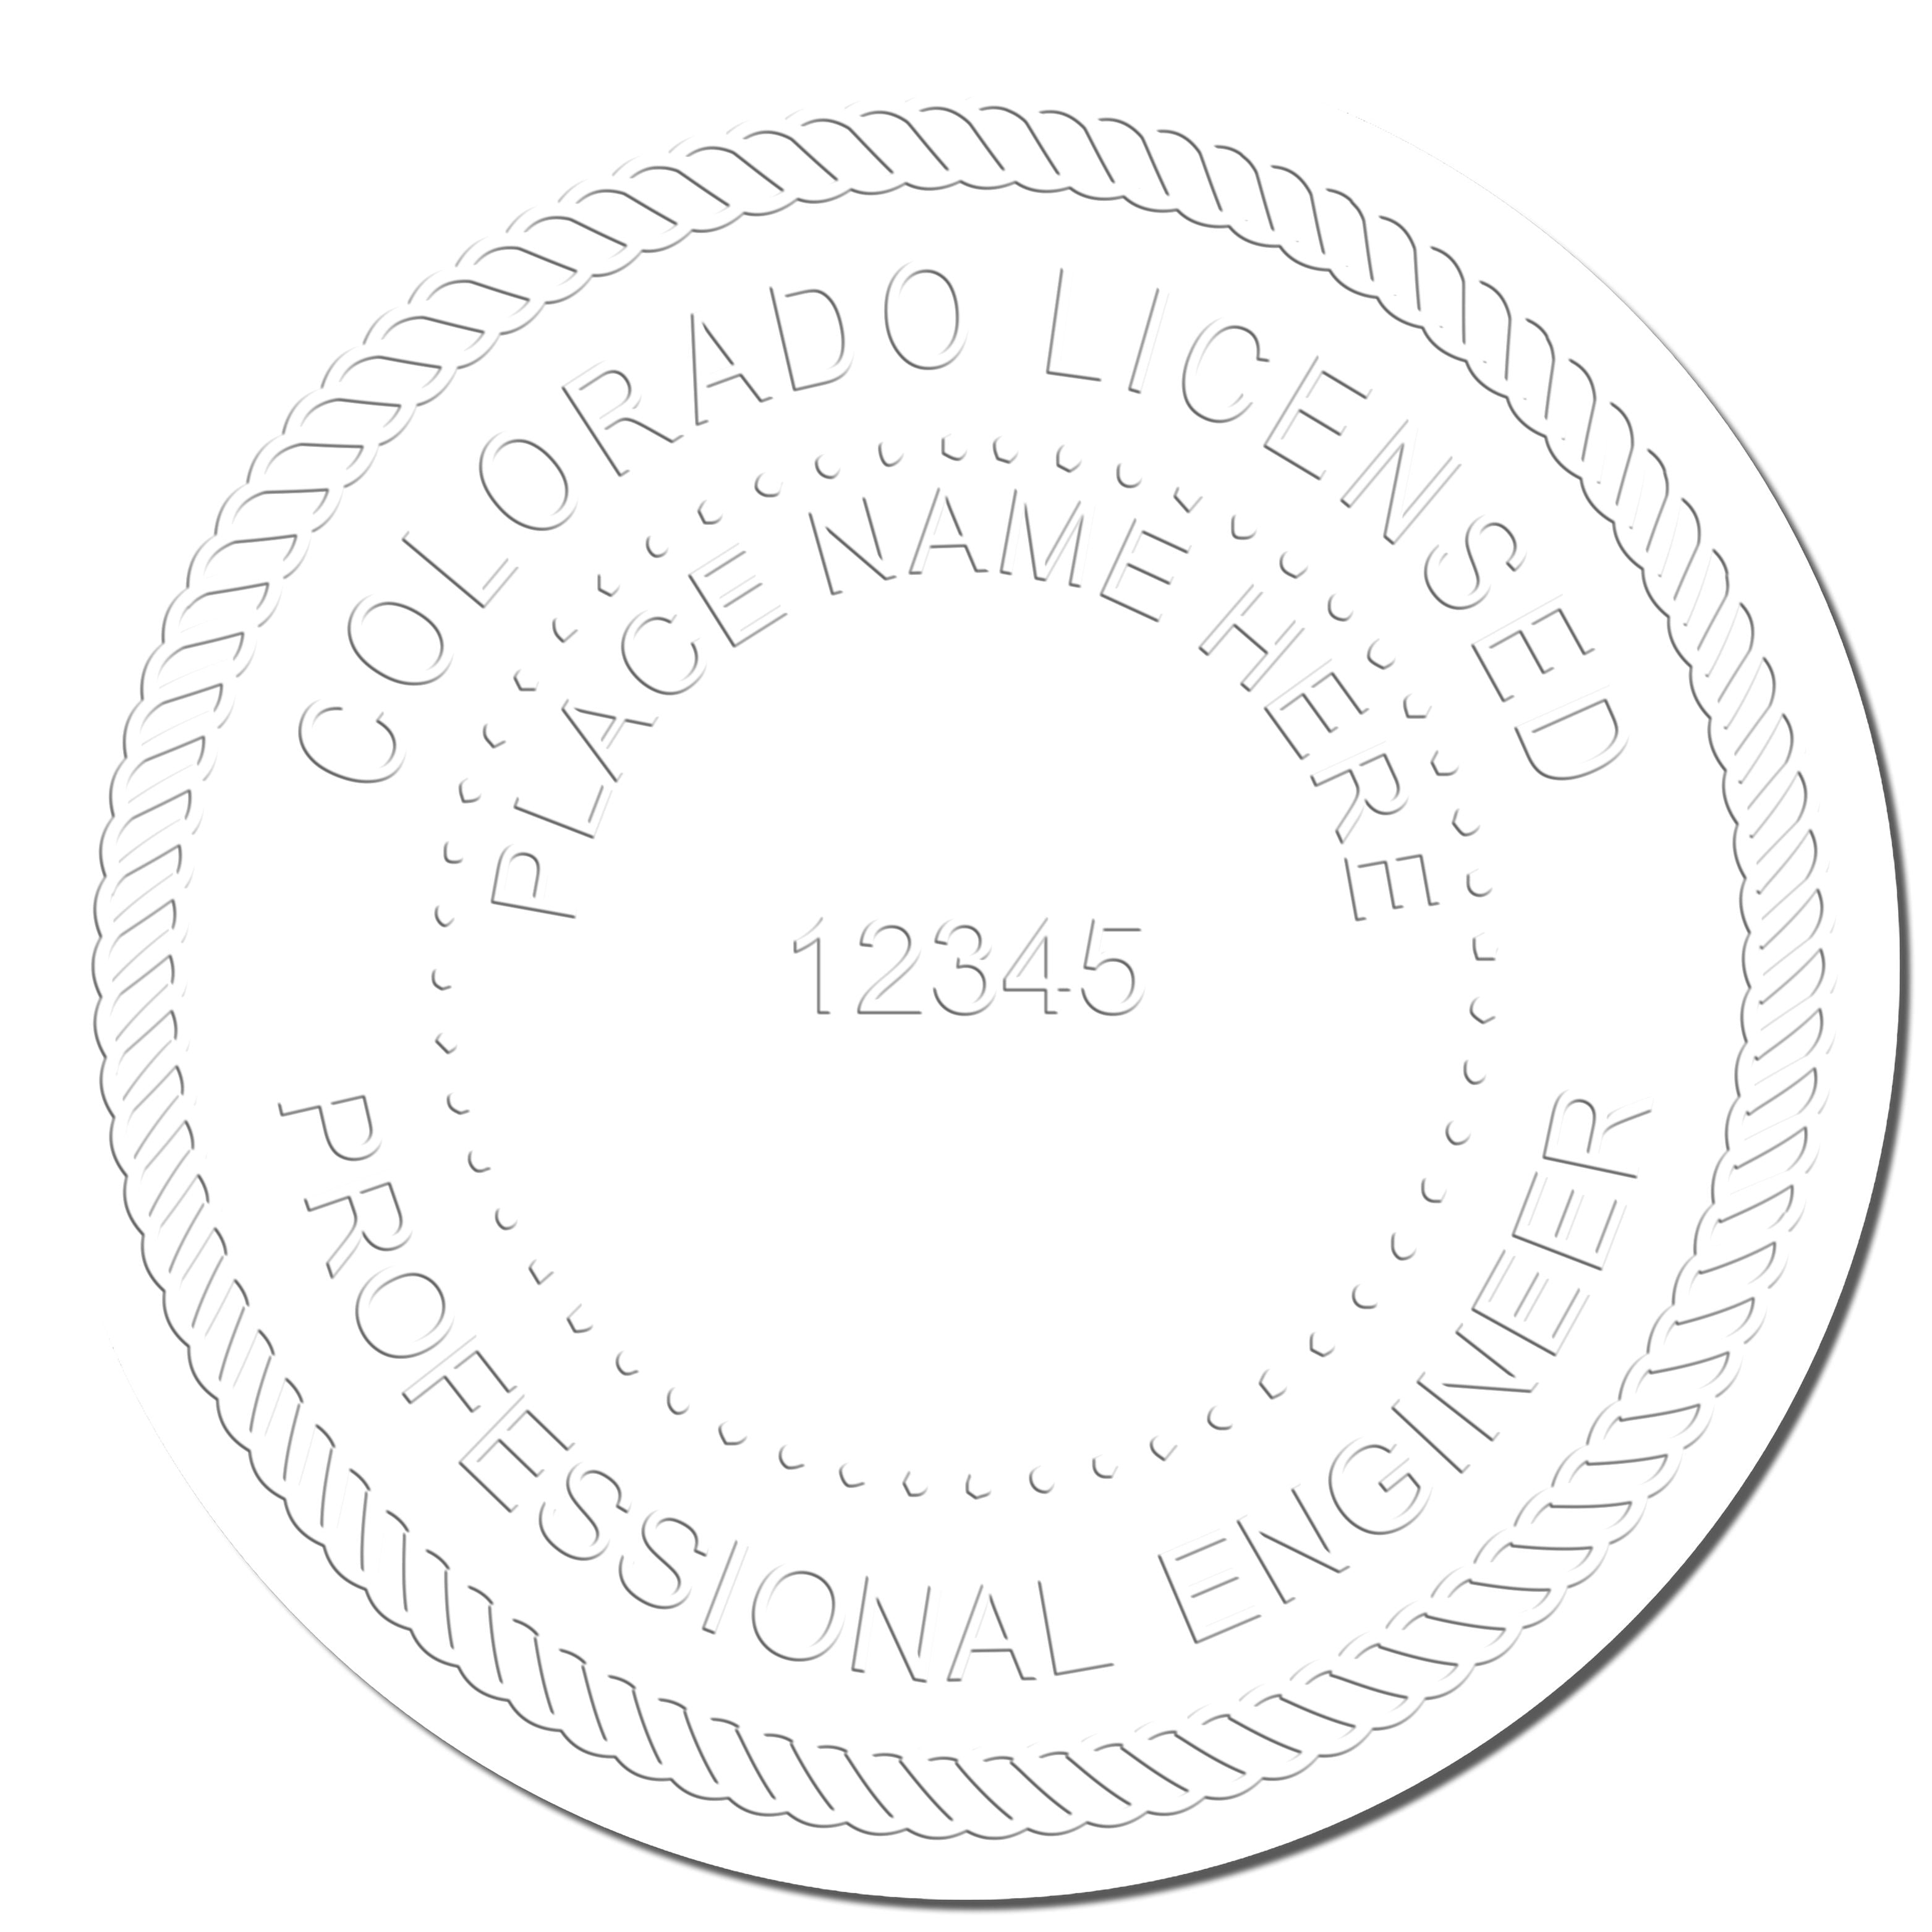 A photograph of the Handheld Colorado Professional Engineer Embosser stamp impression reveals a vivid, professional image of the on paper.